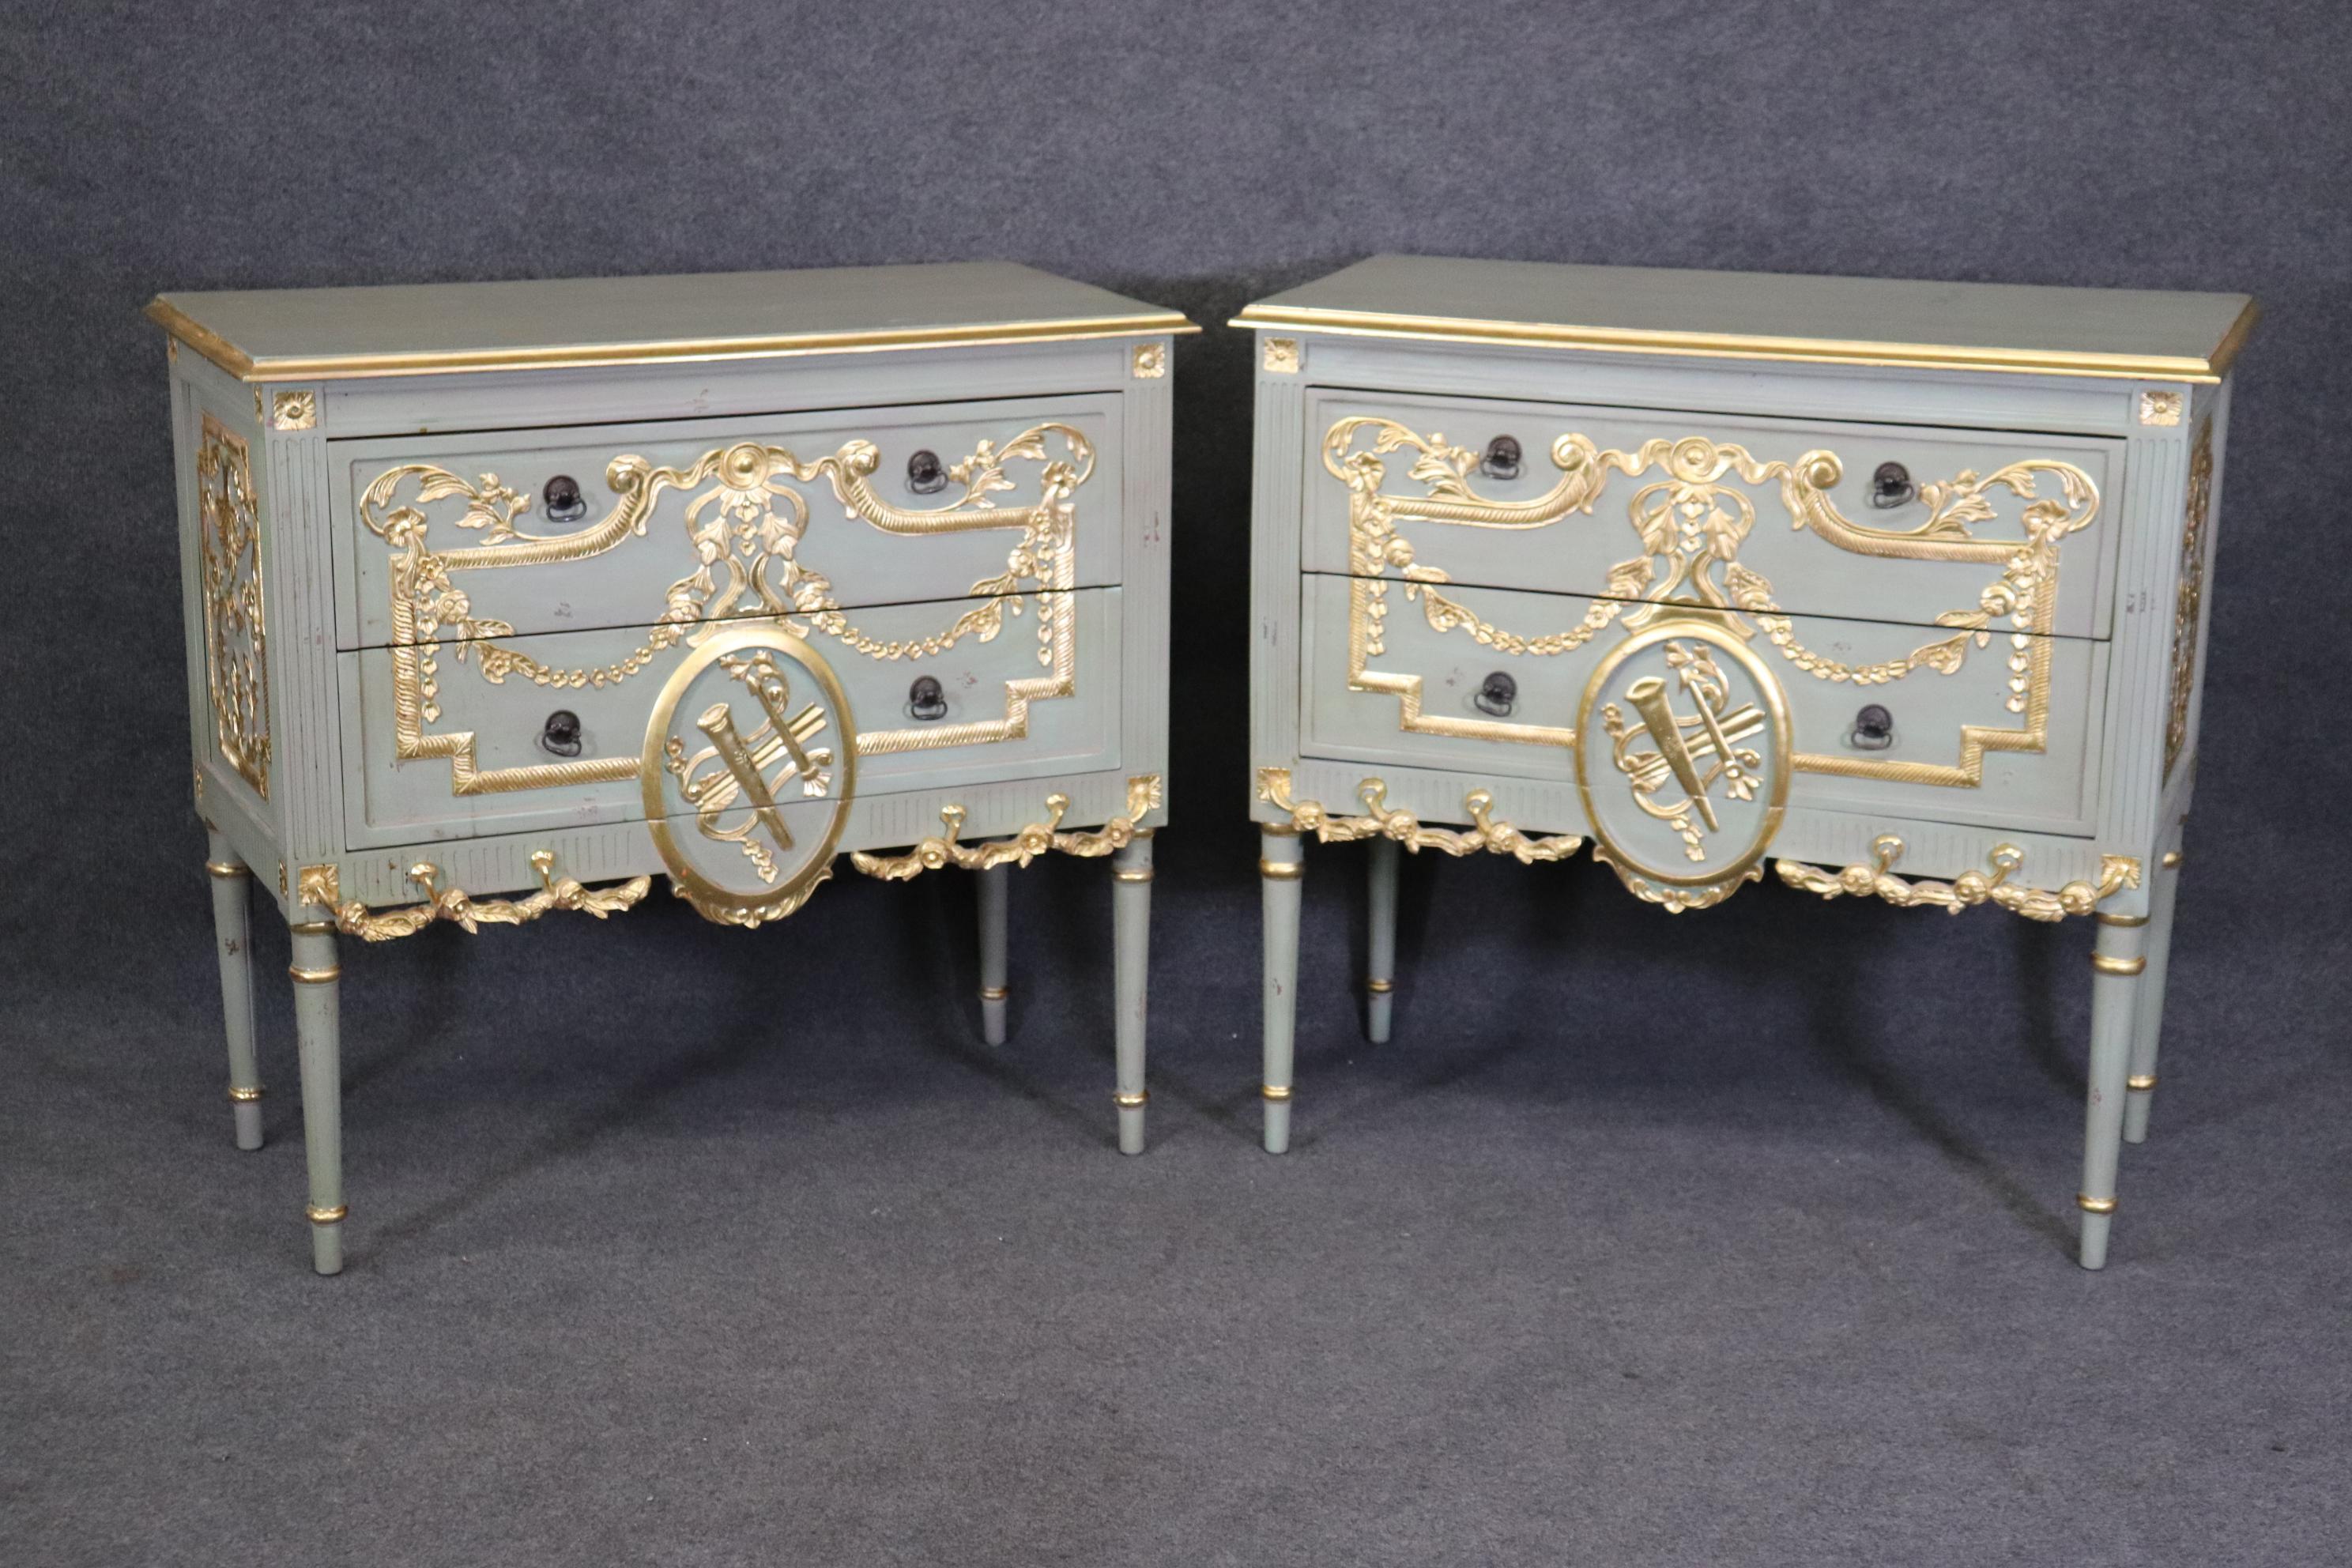 This is a flamboyant pair of bright gold leaf gilded Robin's egg blue distressed finish commodes. The gold is newer and the painted finish probably is too. There are some minor defects that will show as they are used such as a visible cup ring, but